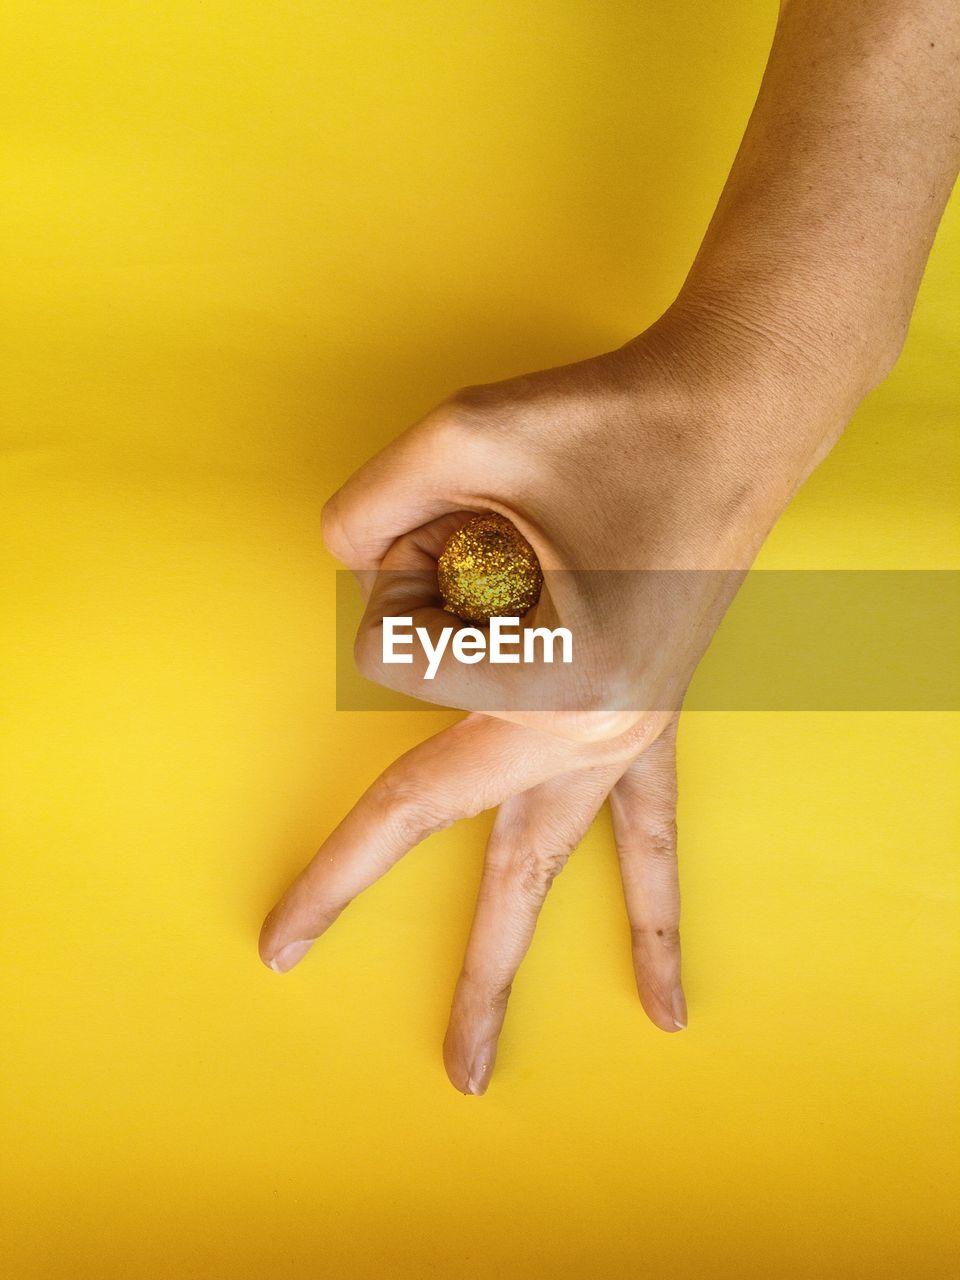 Close-up of human hand gesturing over shiny ball against yellow background